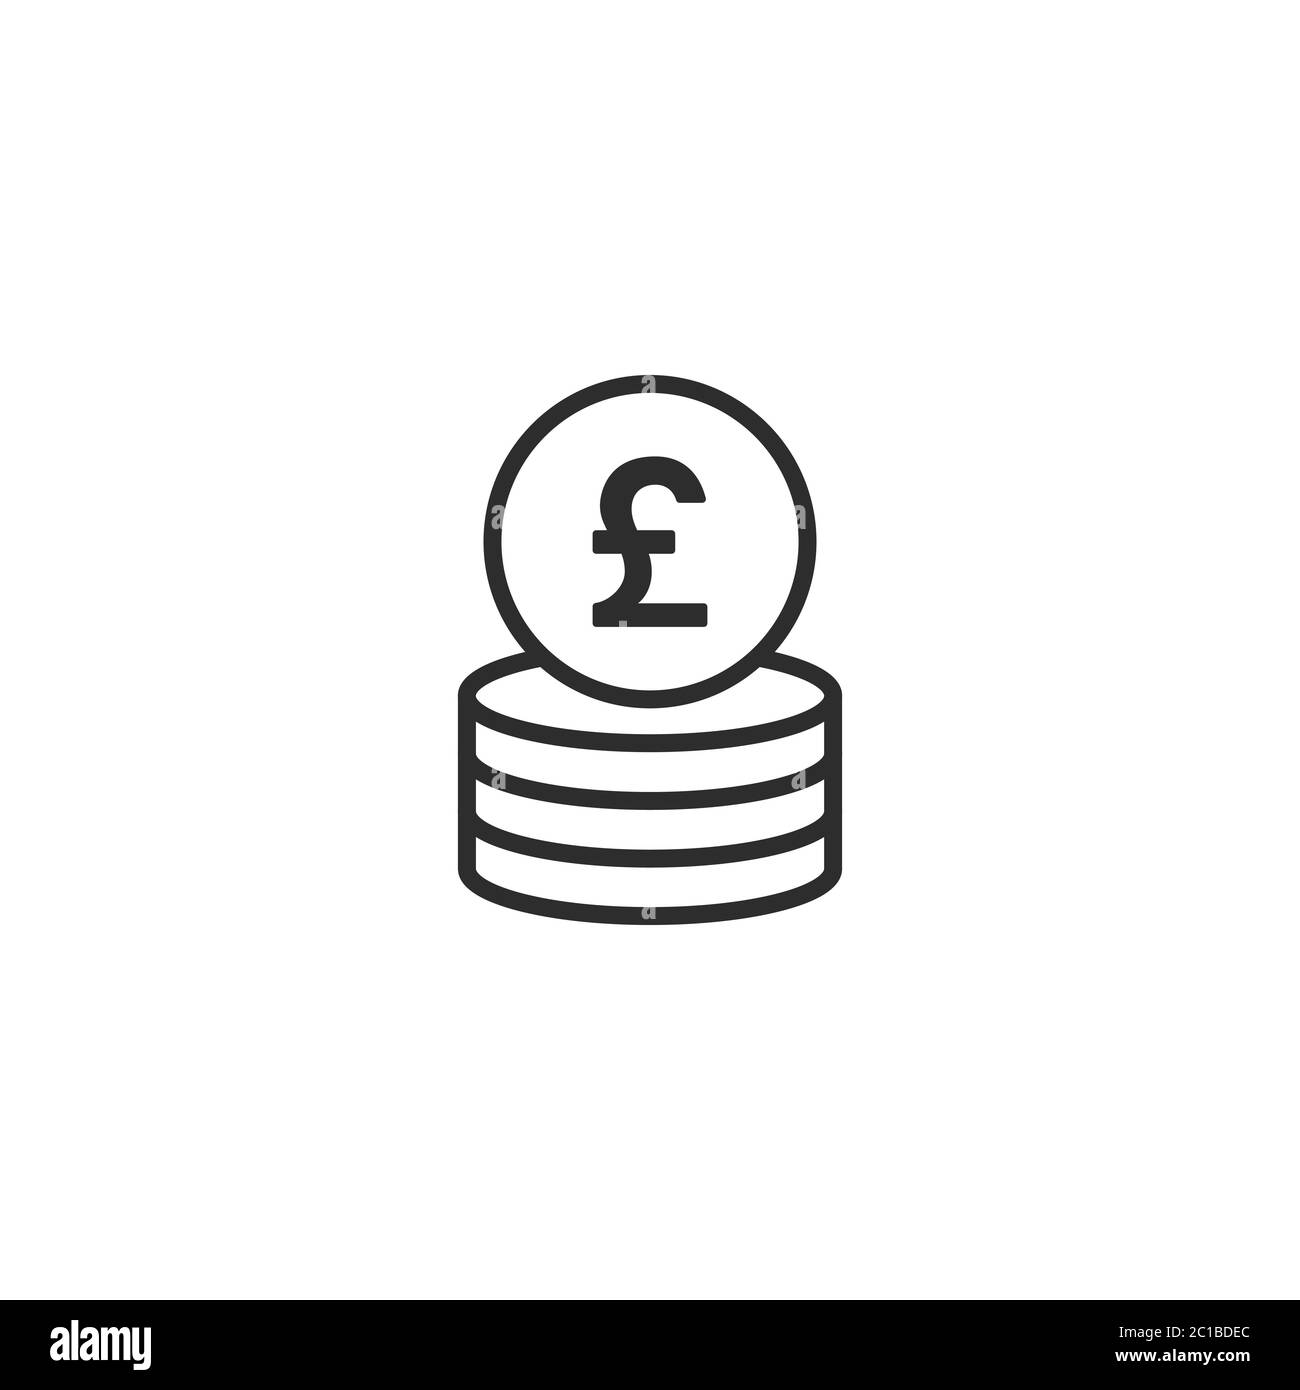 Stack of pound sterling coins with coin in front of it. Flat black icon. Isolated on white. Economy, finance, money pictogram. Wealth symbol. Vector i Stock Vector